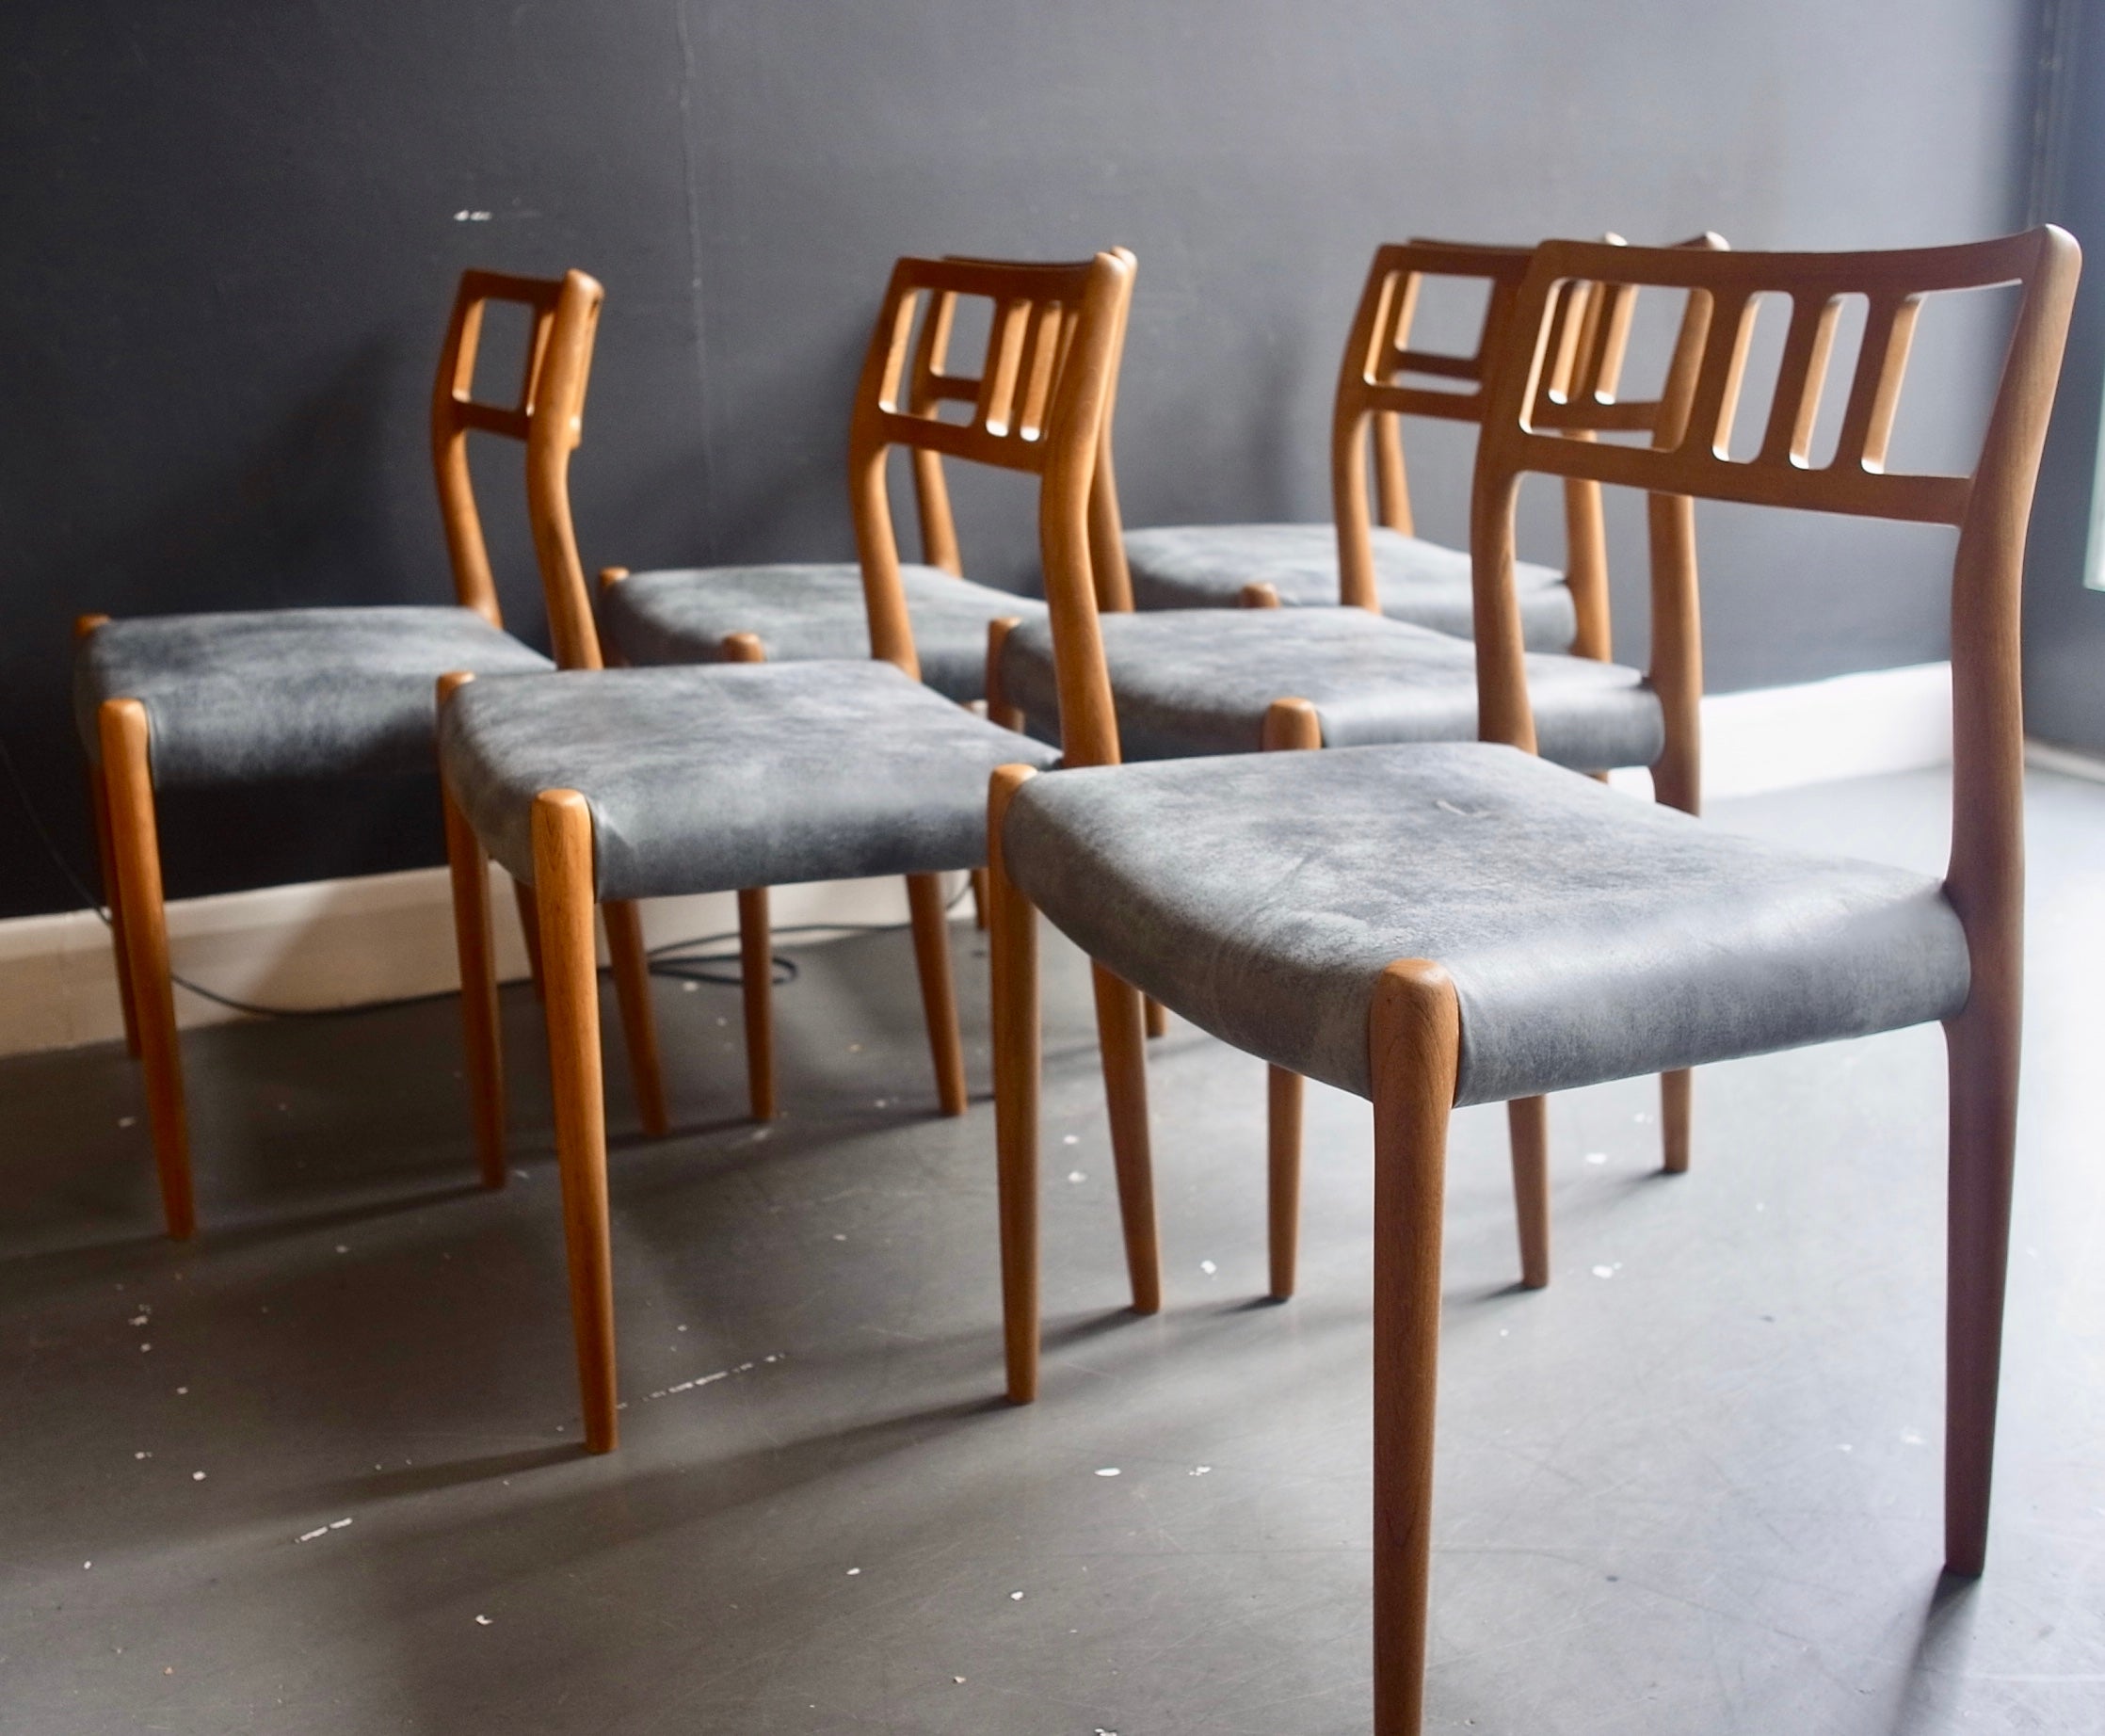 Six vintage teak framed Danish model 78 dining chairs reupholstered in quality grey leather. Designed by Niels O Moller and manufactured by J.L. Møller, these chairs are in very good vintage condition, having been restored, refurbished and